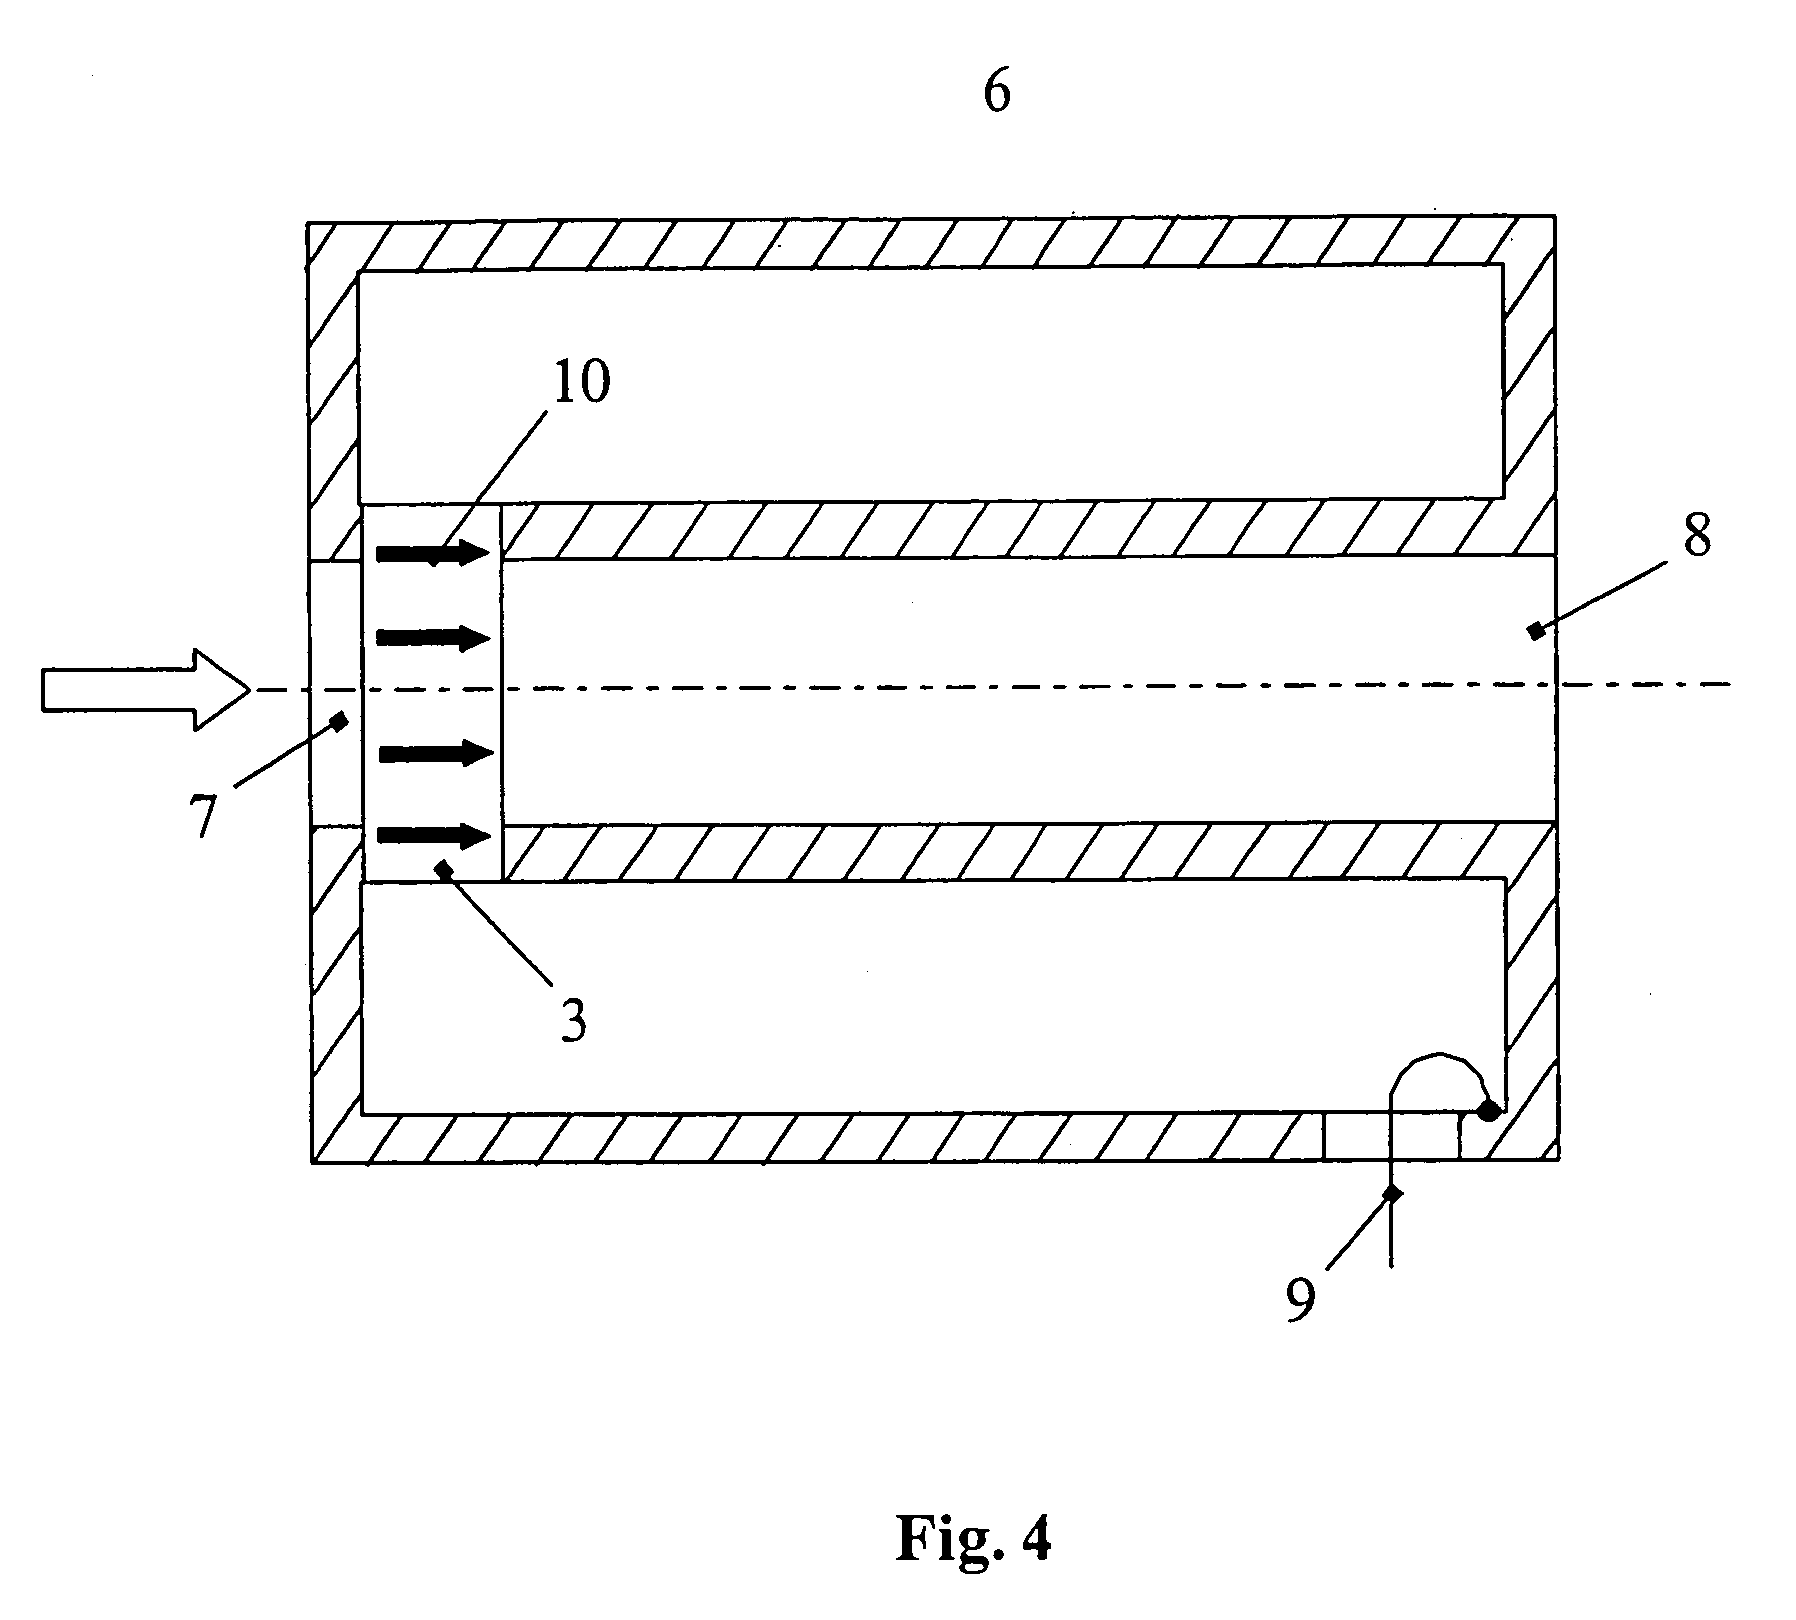 Electrooptical devices, electrooptical thin crystal films and methods making same